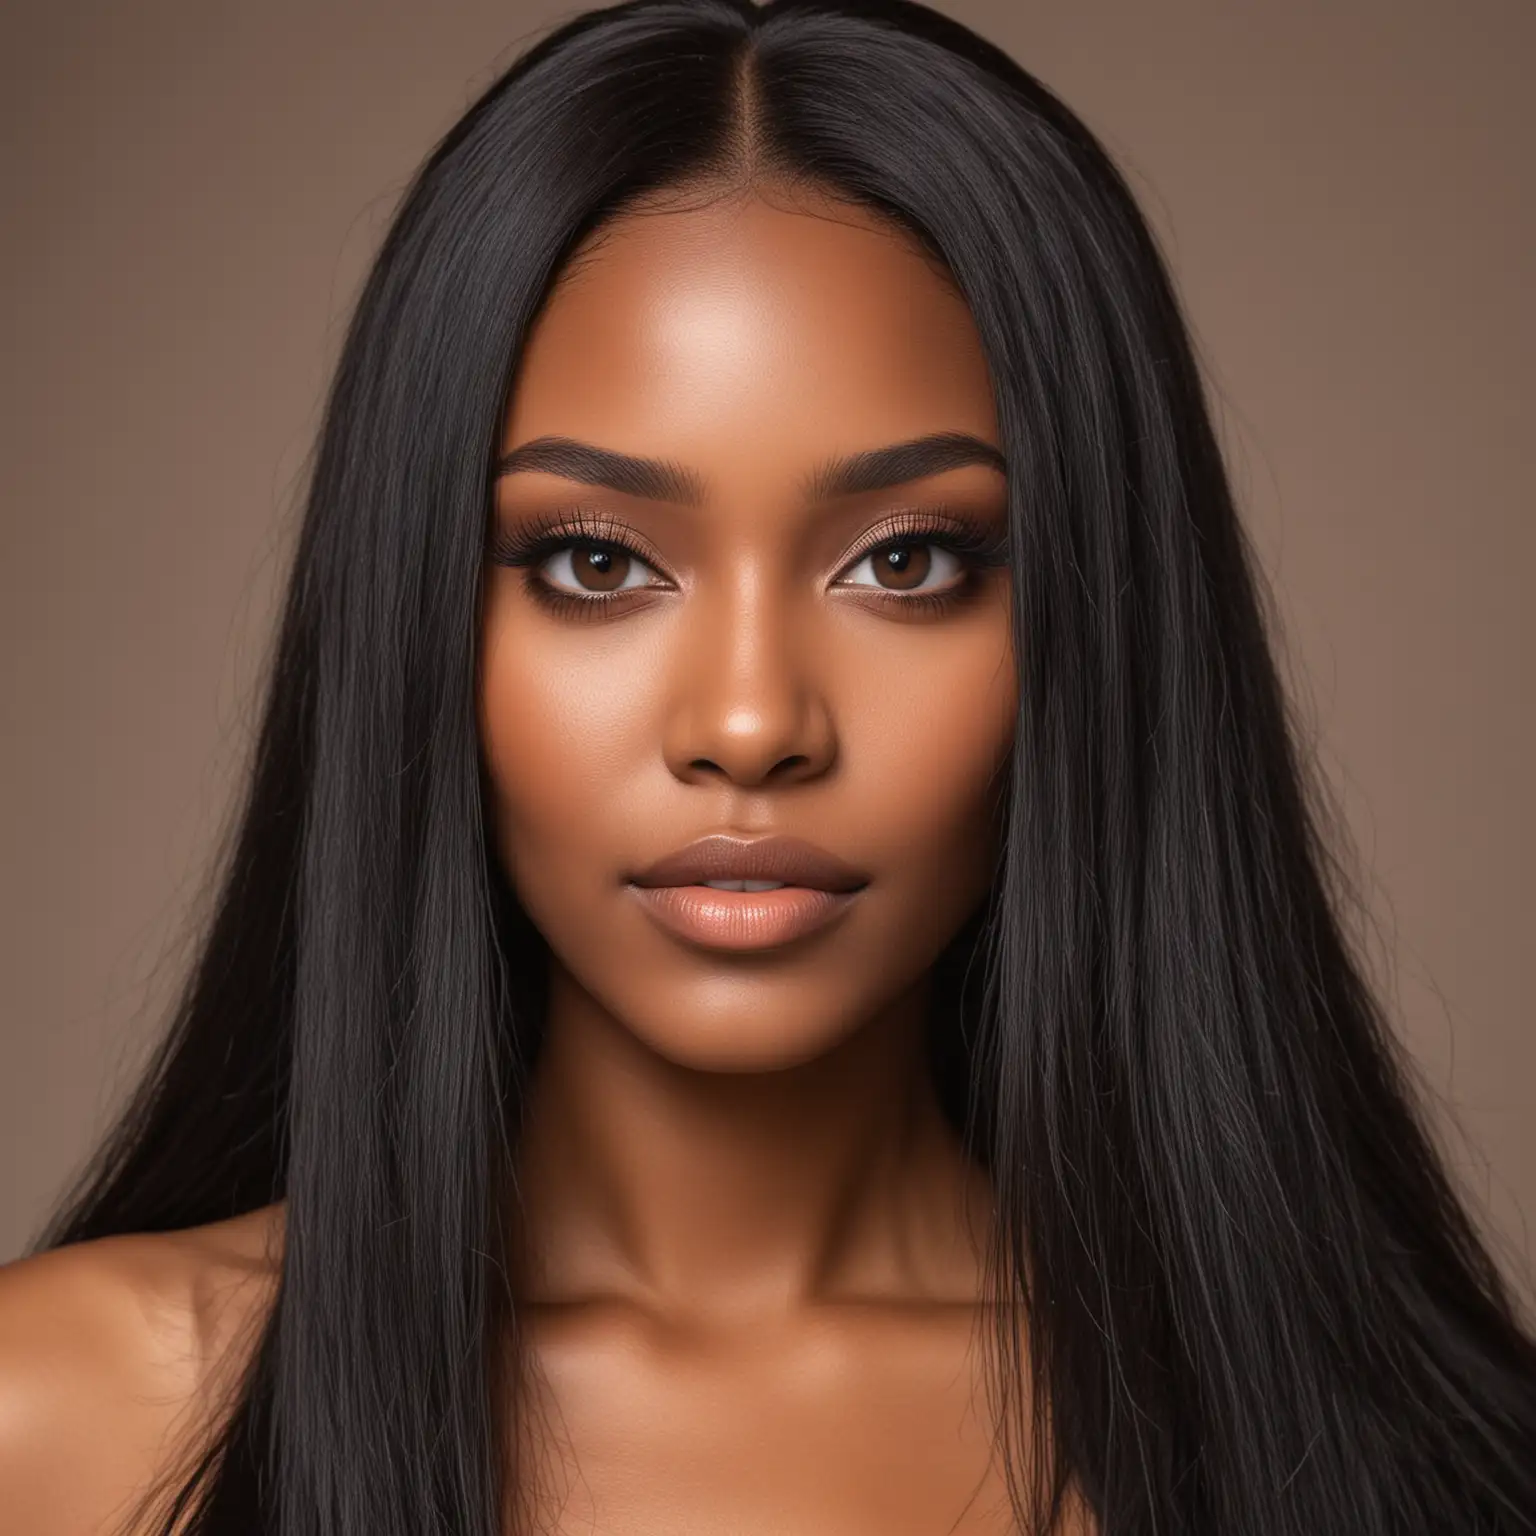 Beautiful African American Woman, Long straight black hair, middle part, netural look, natural glam makeup look with voluminous lashes, professional photoshoot, headshot



